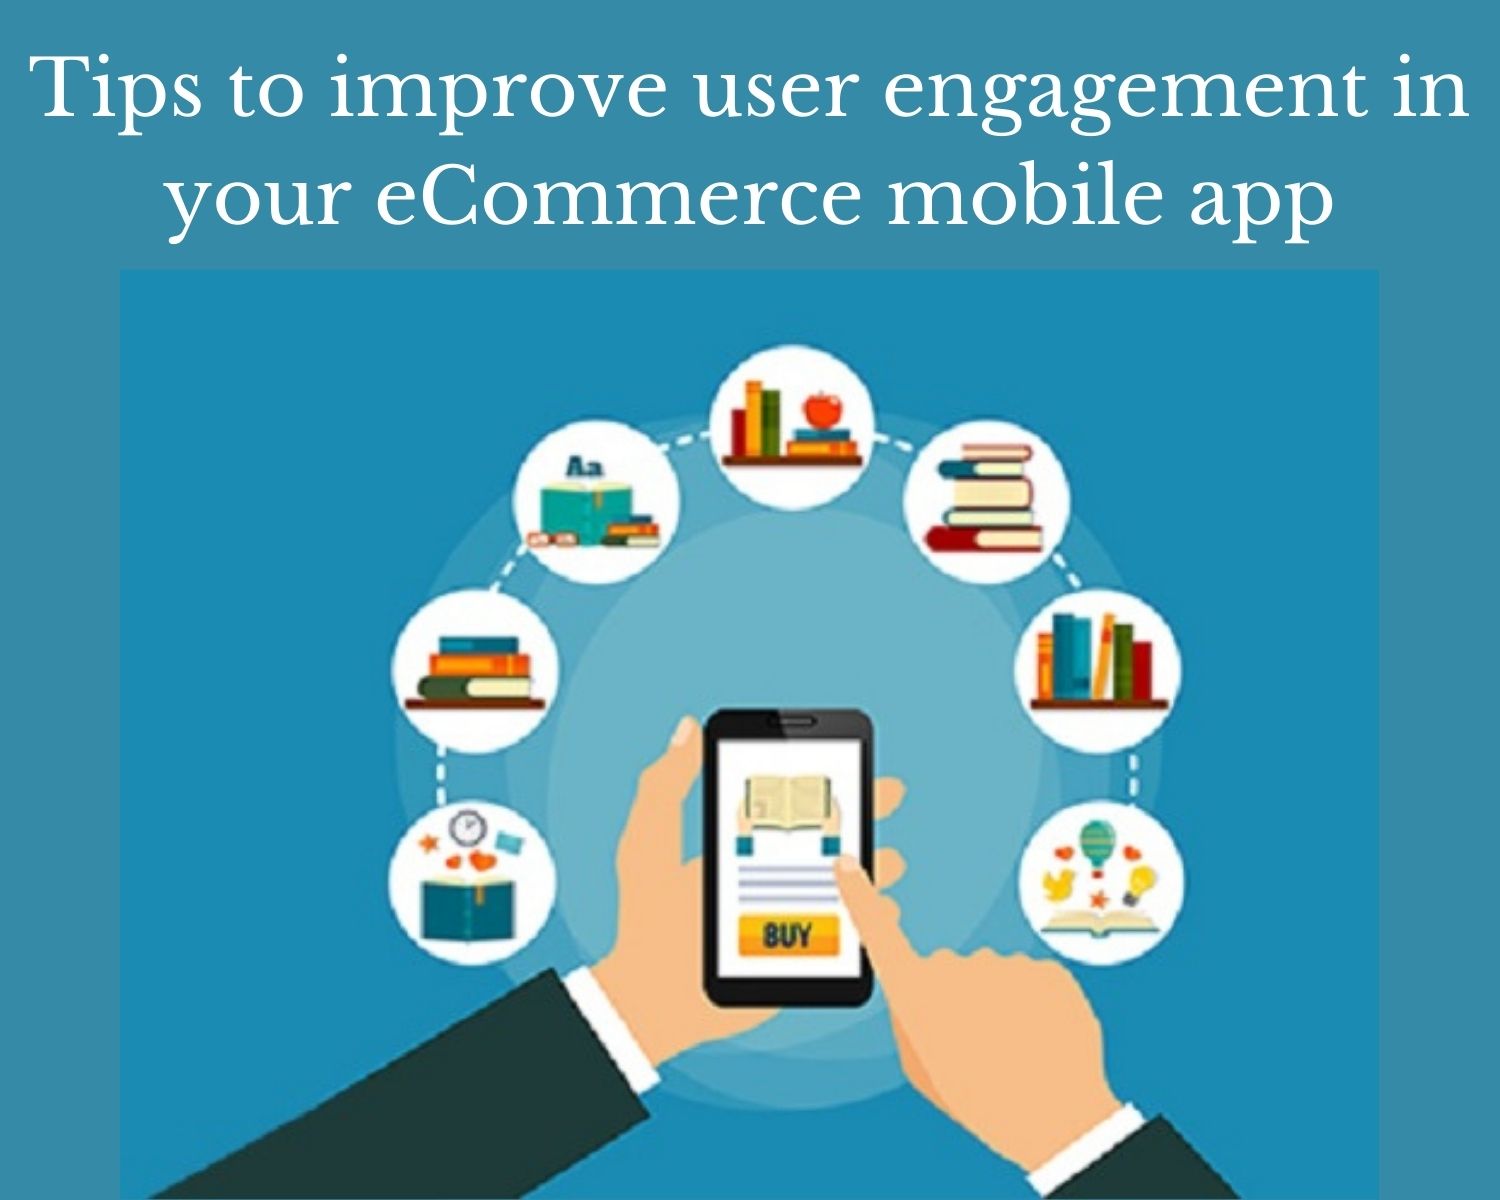 Tips To Improve User Engagement in Your eCommerce Mobile App